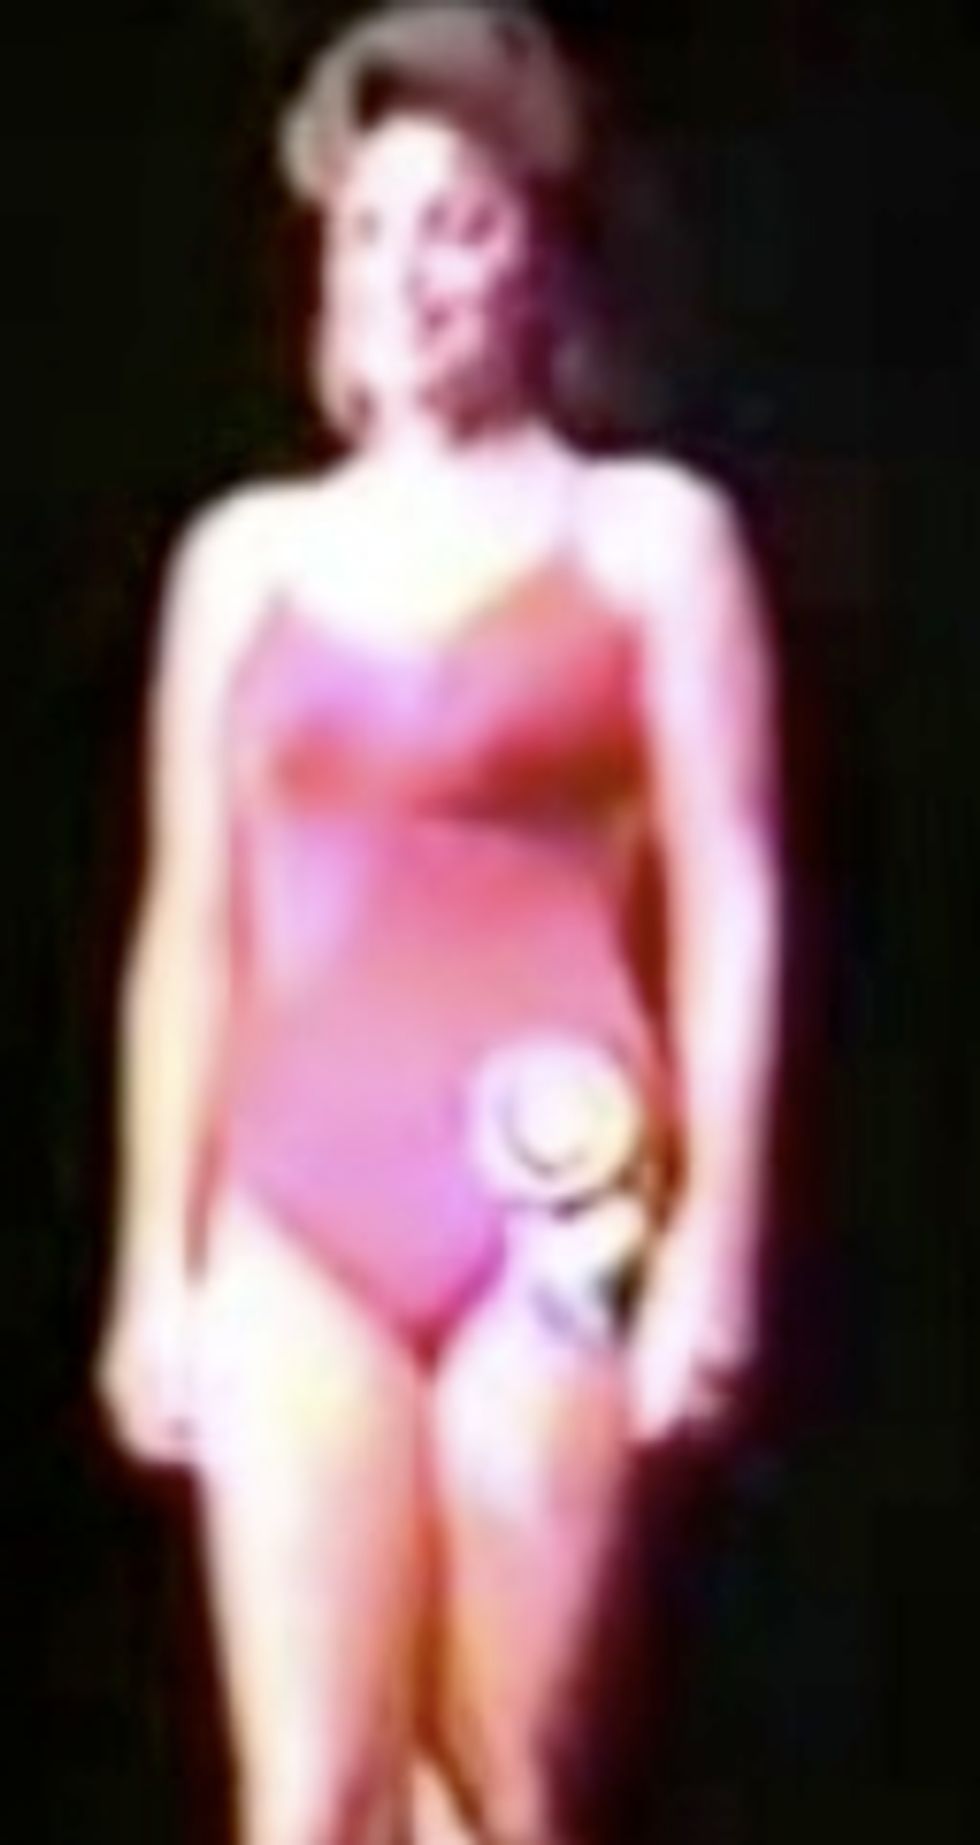 OMG Old Video of Sarah Palin In Ugly Swimsuit